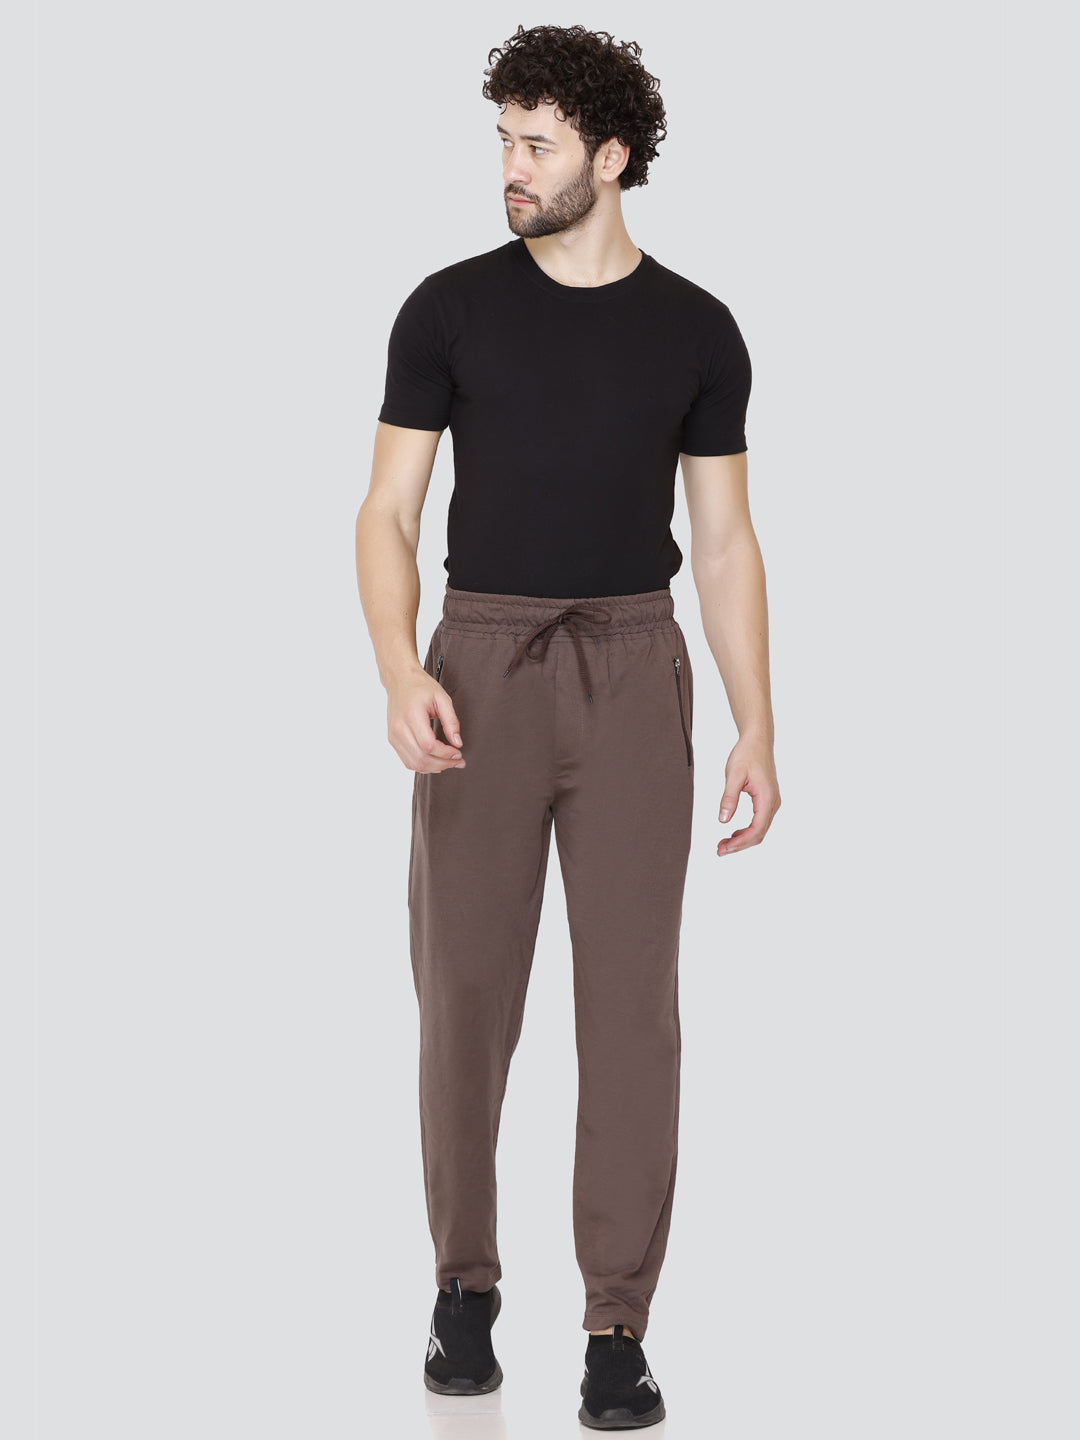 Buy Brown and Black Combo of 2 Men Handloom Pant Cotton for Best Price,  Reviews, Free Shipping